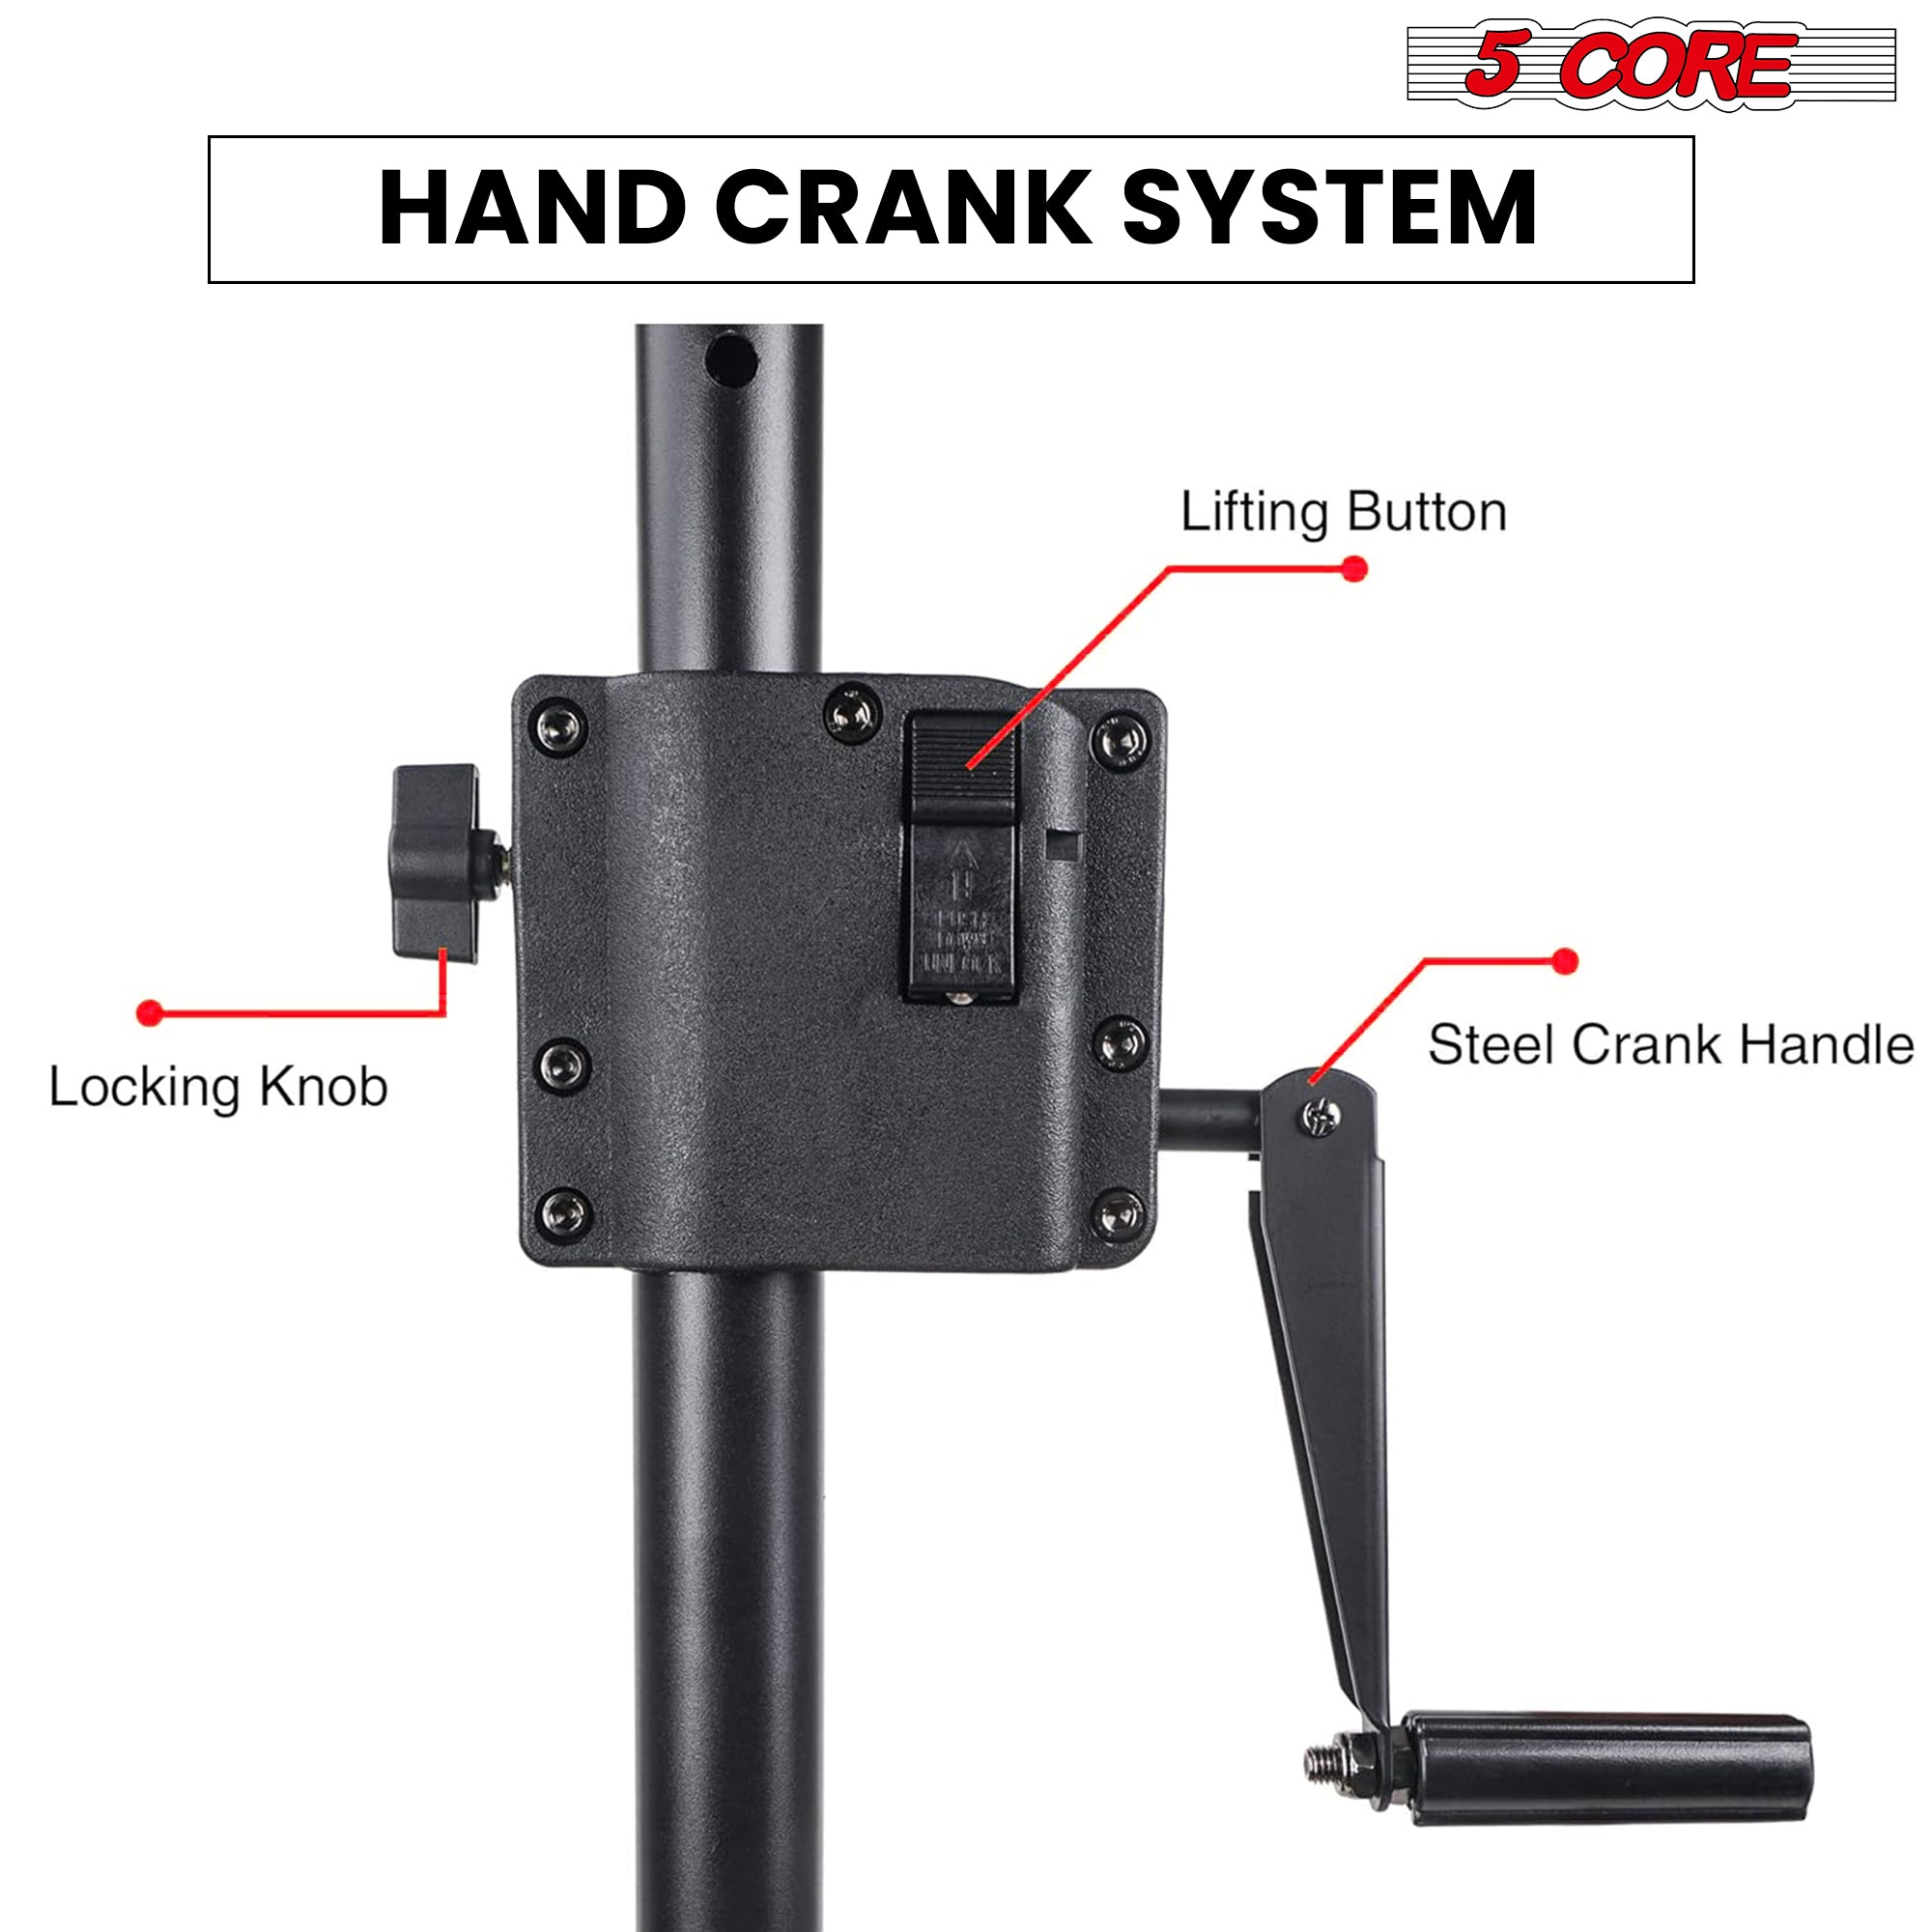 5 Core Speaker Stand - Aluminum Hub, Safety Switch, and Crank-Up Adjustability.